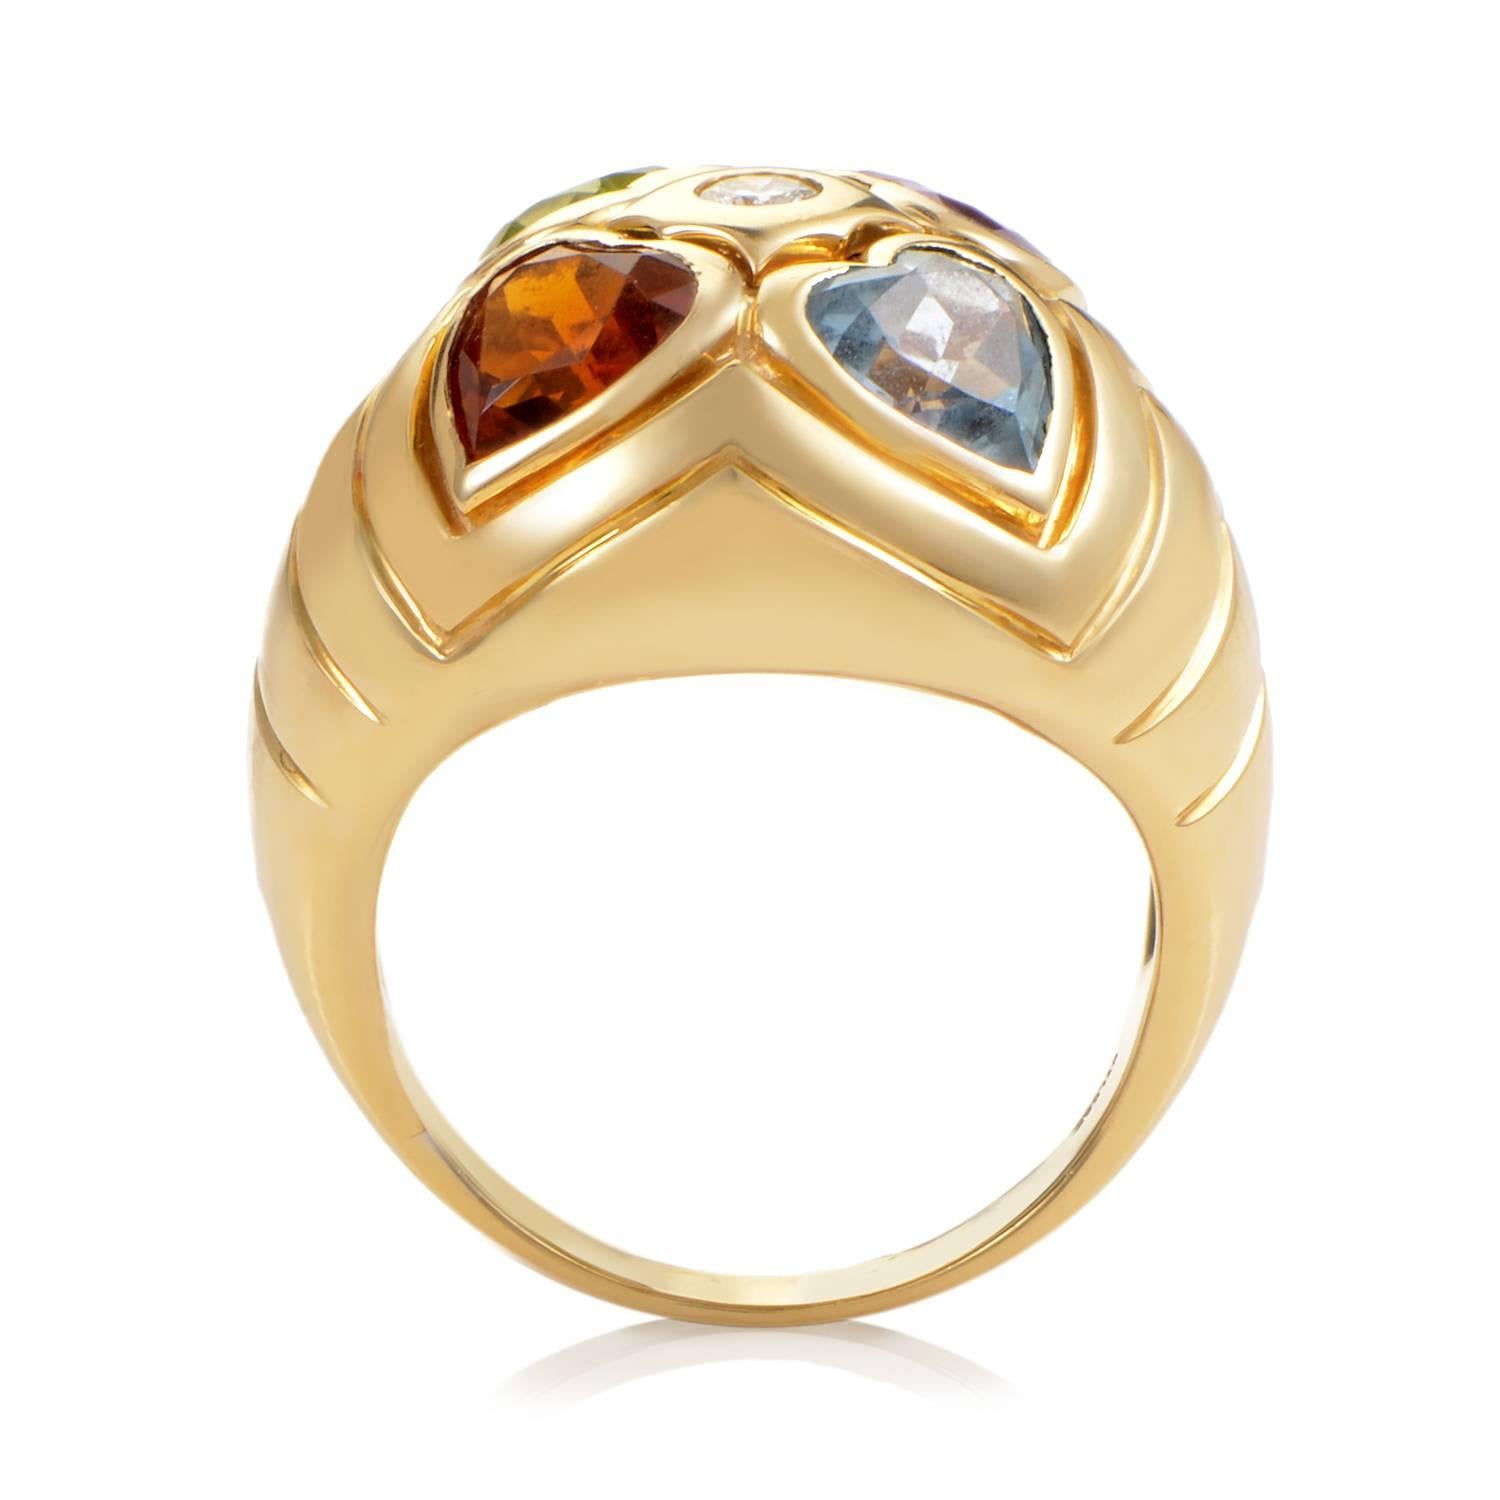 Bulgari offers a rich array of precious elements with this captivating ring design. The band quickly ascends into a broad display of 18K Yellow Gold, ripples resonating in the meatl near its peak. At the center, a glittering diamond, as four